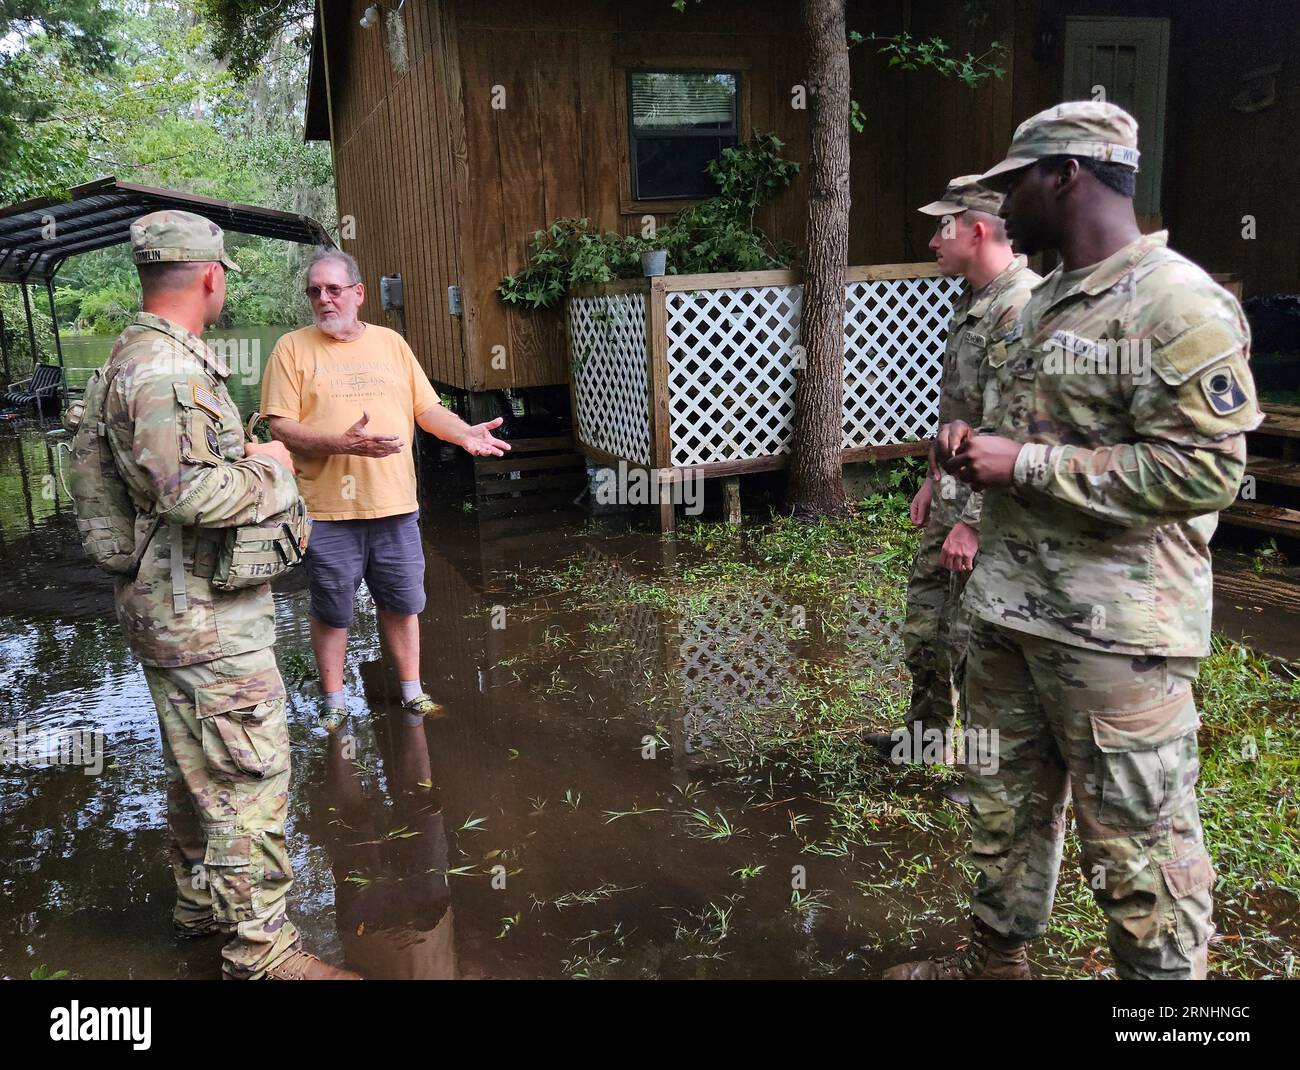 Steinhatchee, United States. 30th Aug, 2023. U.S Army soldiers with the Florida National Guard, 153rd Calvary Regiment, conducts a wellness check with a resident in the aftermath of Hurricane Idalia, August 30, 2023 in Steinhatchee, Florida. Credit: Spc. Christian Wilson/U.S Army/Alamy Live News Stock Photo